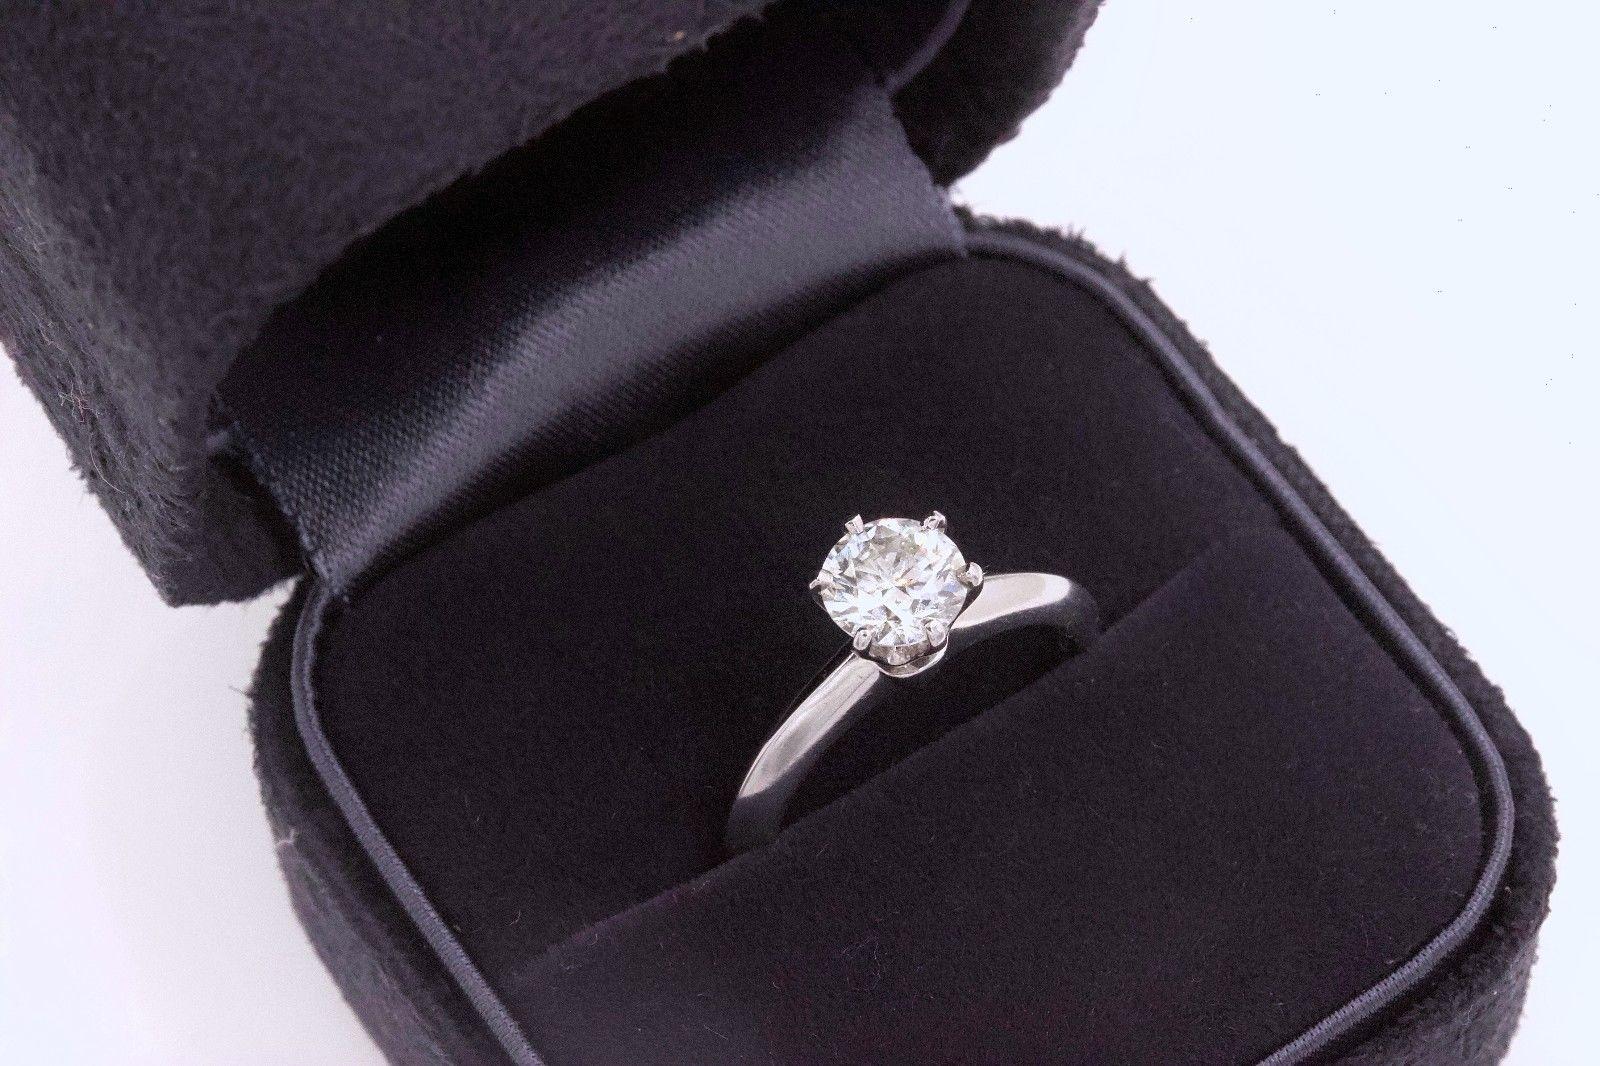 Tiffany & Co. Round Diamond Ring Solitaire 1.00 Carat H VS1 Papers Box 2